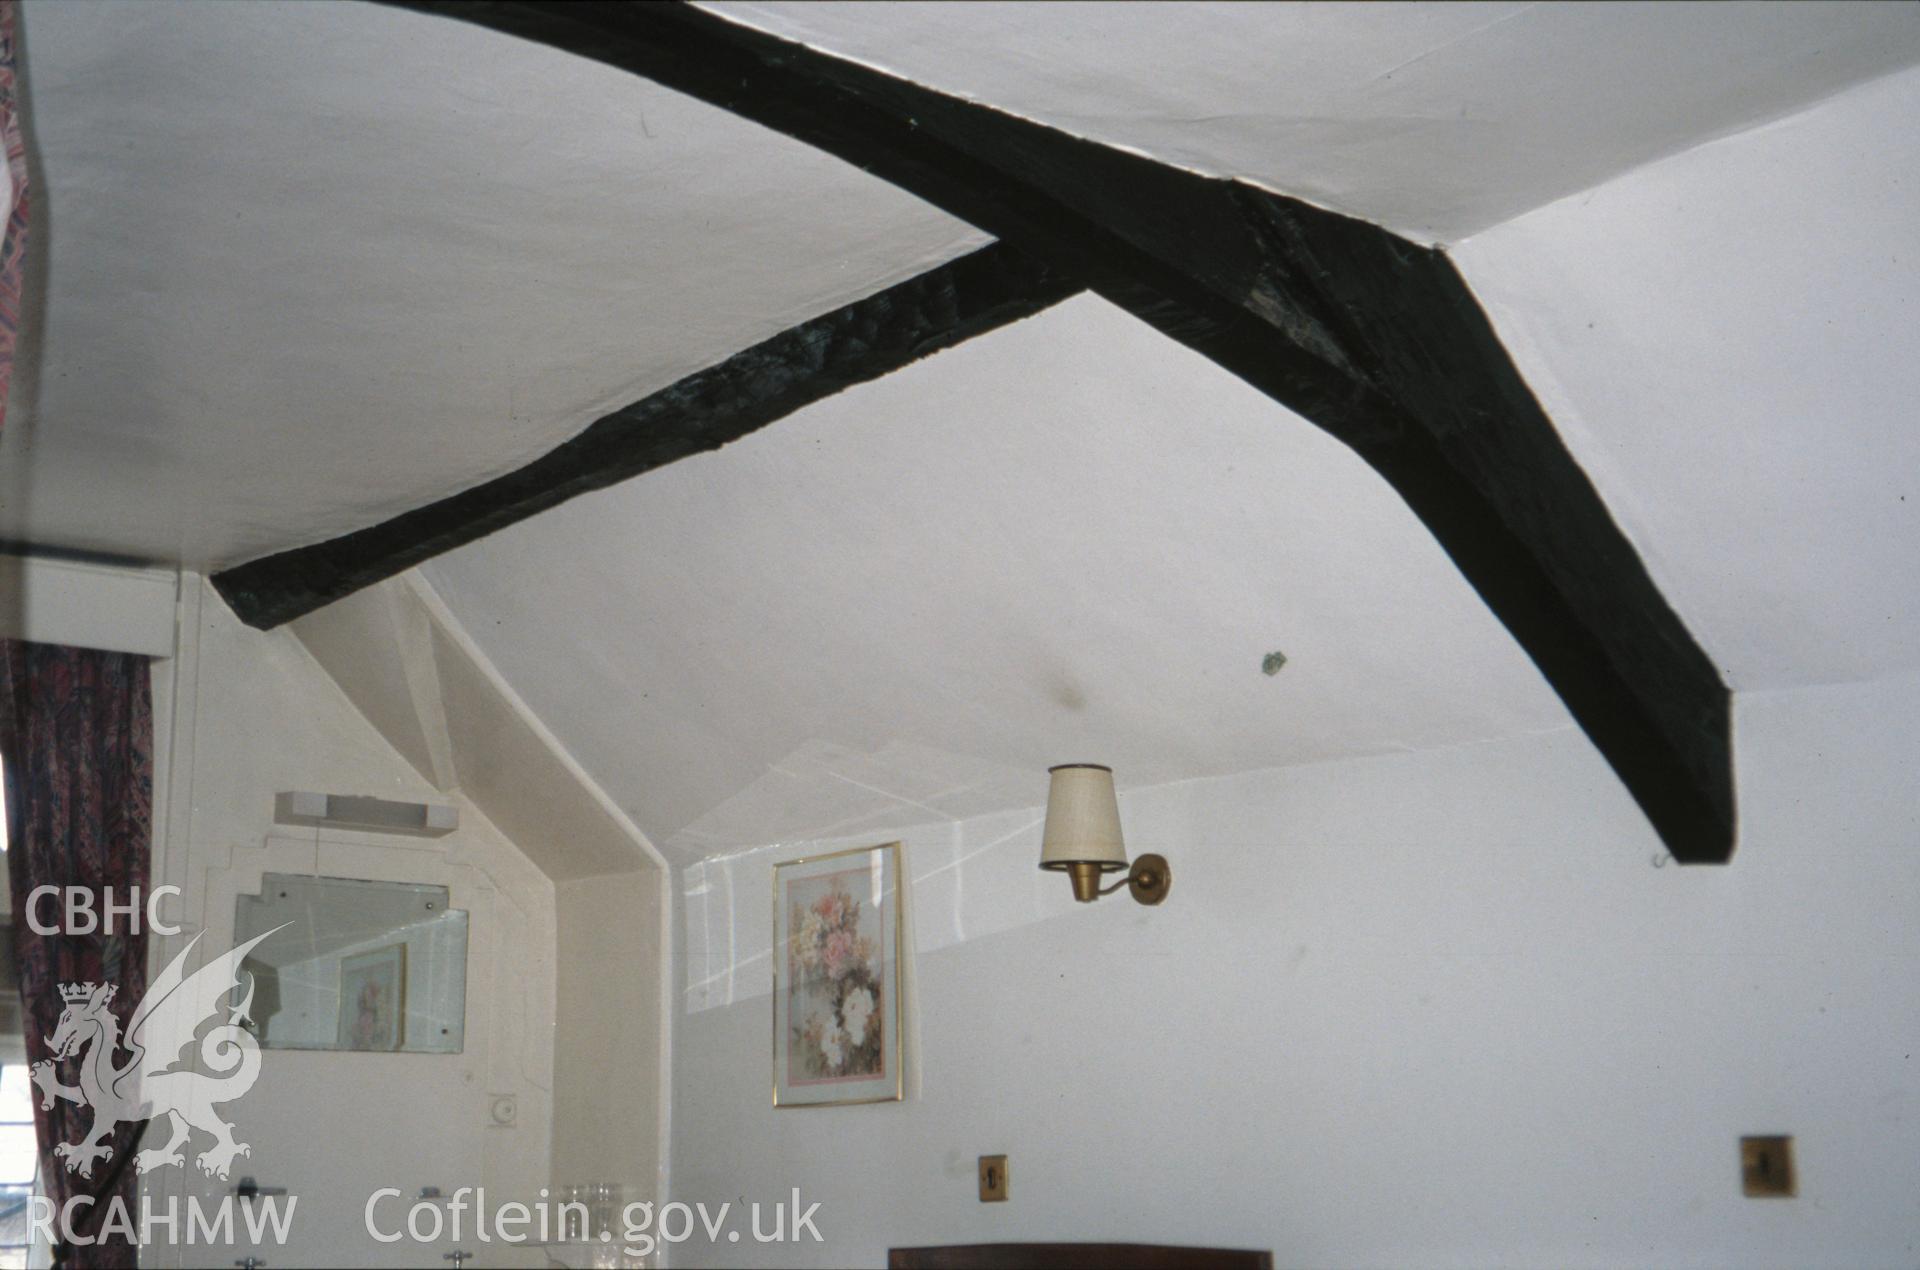 Interior view showing arched collar truss to the room above the porch.